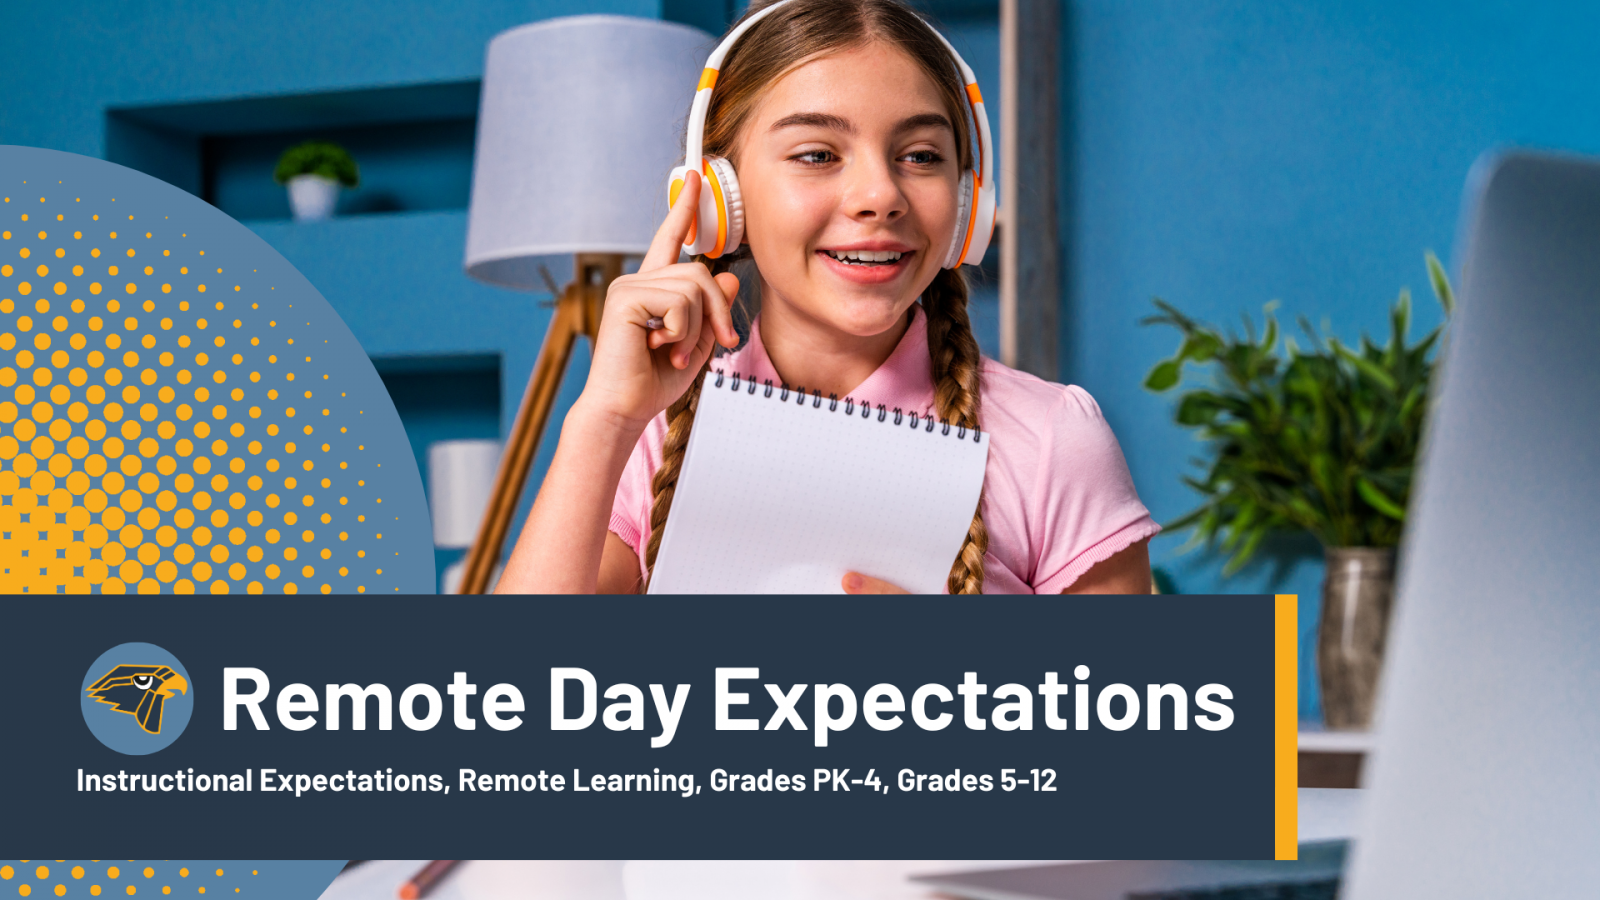 A student works at a laptop from home. Text: Remote Day Expectations: Instructional Expectations, Remote Learning, Grades 5-12, Grades PK-4